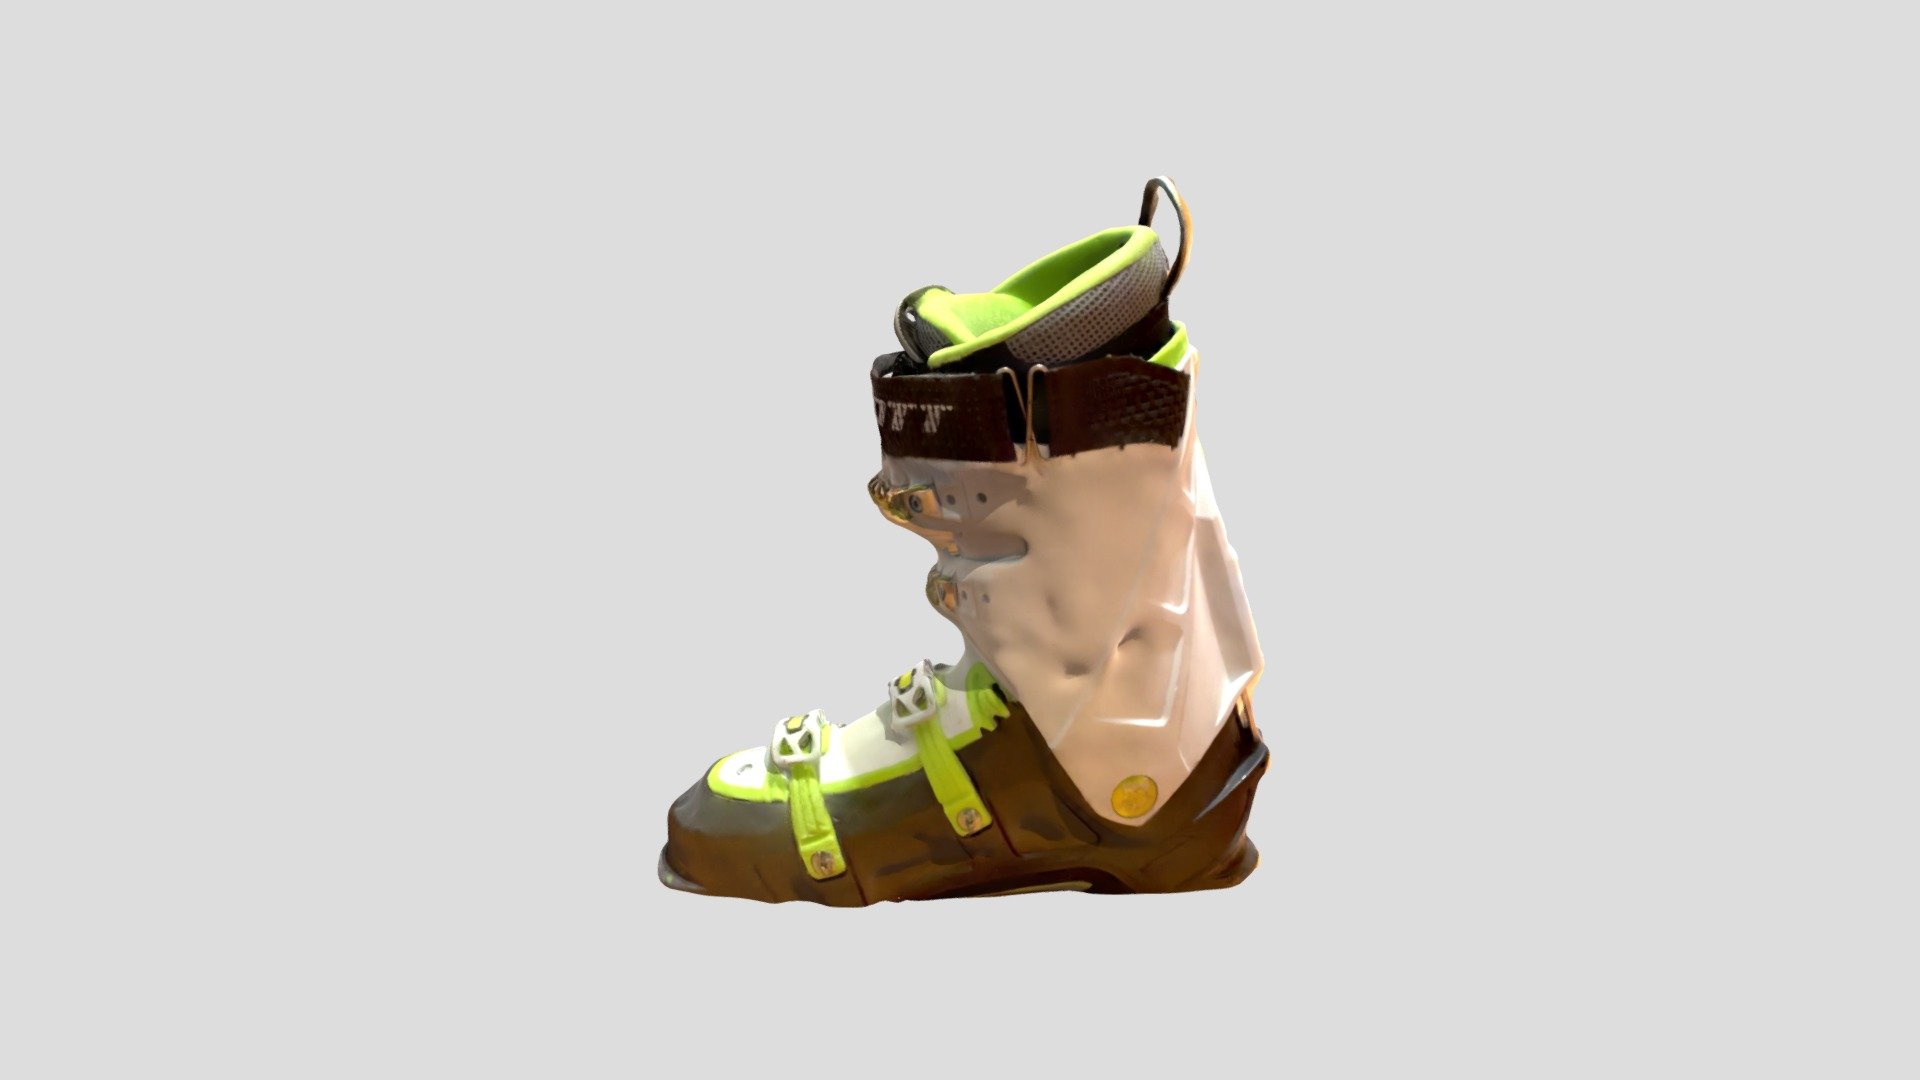 We hope you enjoy this ski shoe model.
The model is created to be used for sales in the aftermarket.
This model is created by using photogrammetry.
We hope you enjoy this model.

We used the weitblick.ai software to create this model.
For more information feel free to follow our company blog: blog.weitblick.ai
If you have any questions leave us a comment 3d model